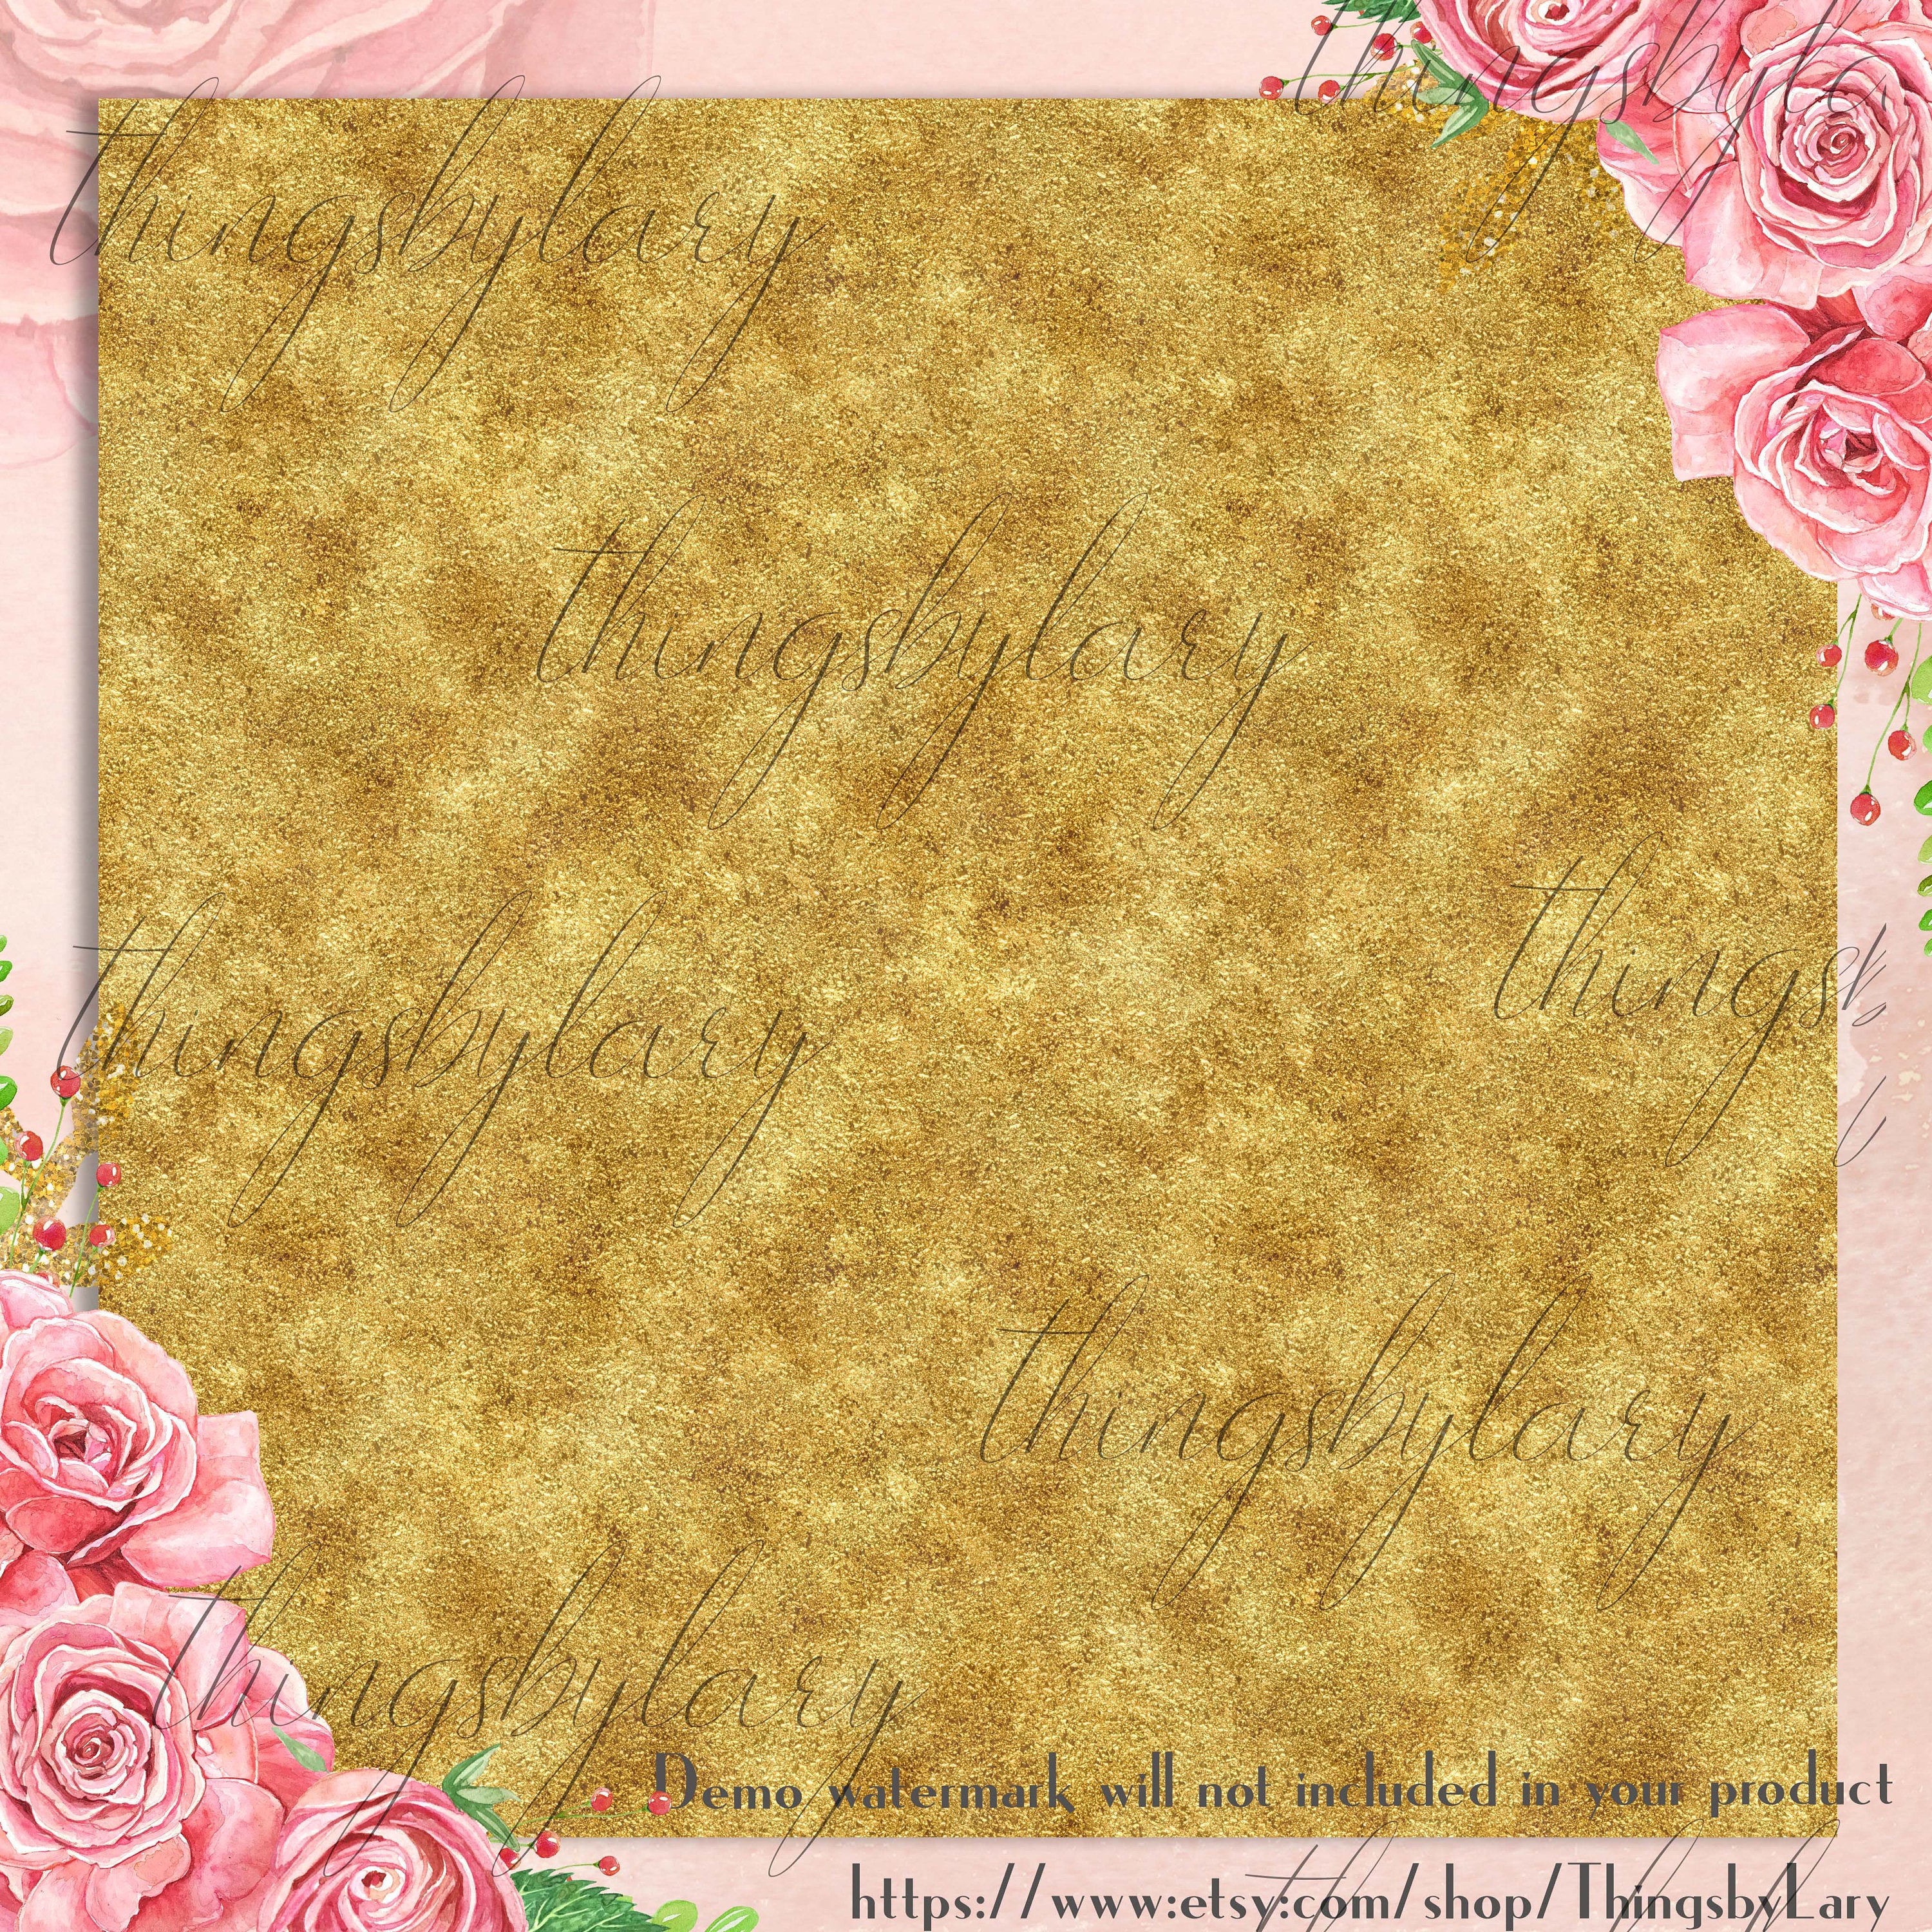 34 Glam Gold Papers 12 inch, 300 Dpi Planner Paper, Commercial Use, Scrapbook Paper, Gold Glitter, Luxury Gold Paper, Digital 24k Gold Paper